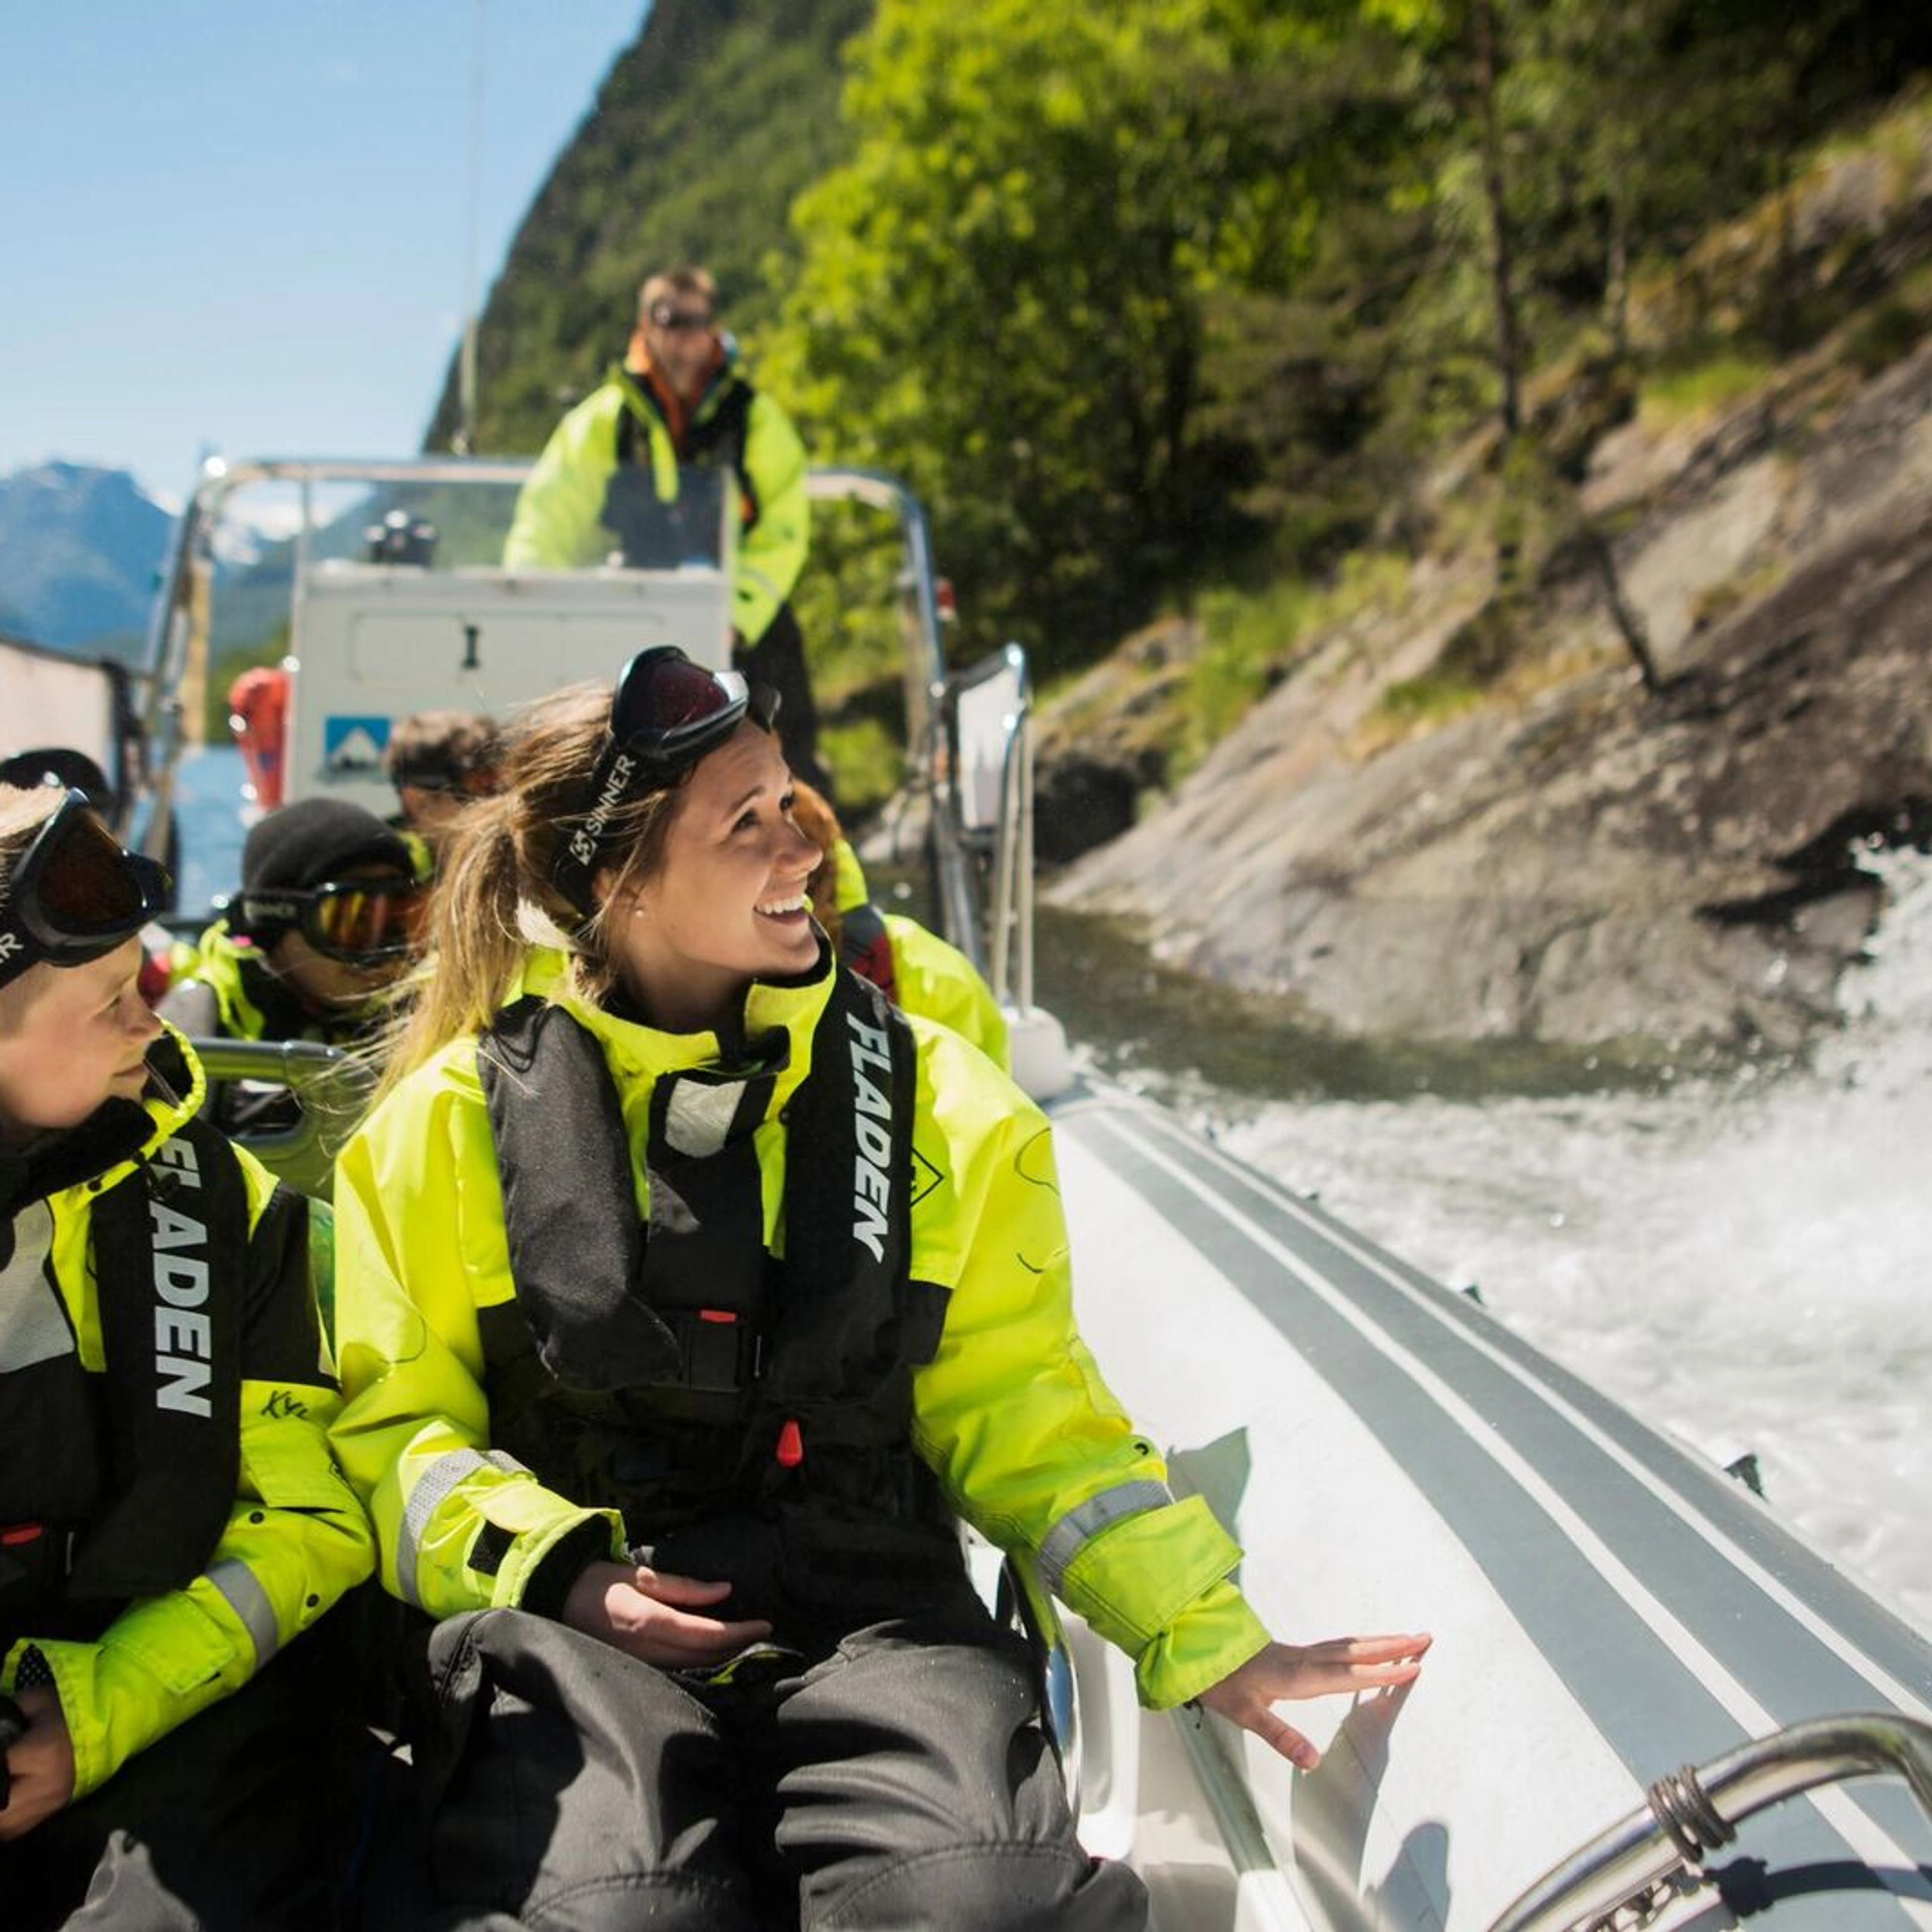 Things to do in Flåm -Heritage RIB boat tour on the Nærøyfjord, Norway